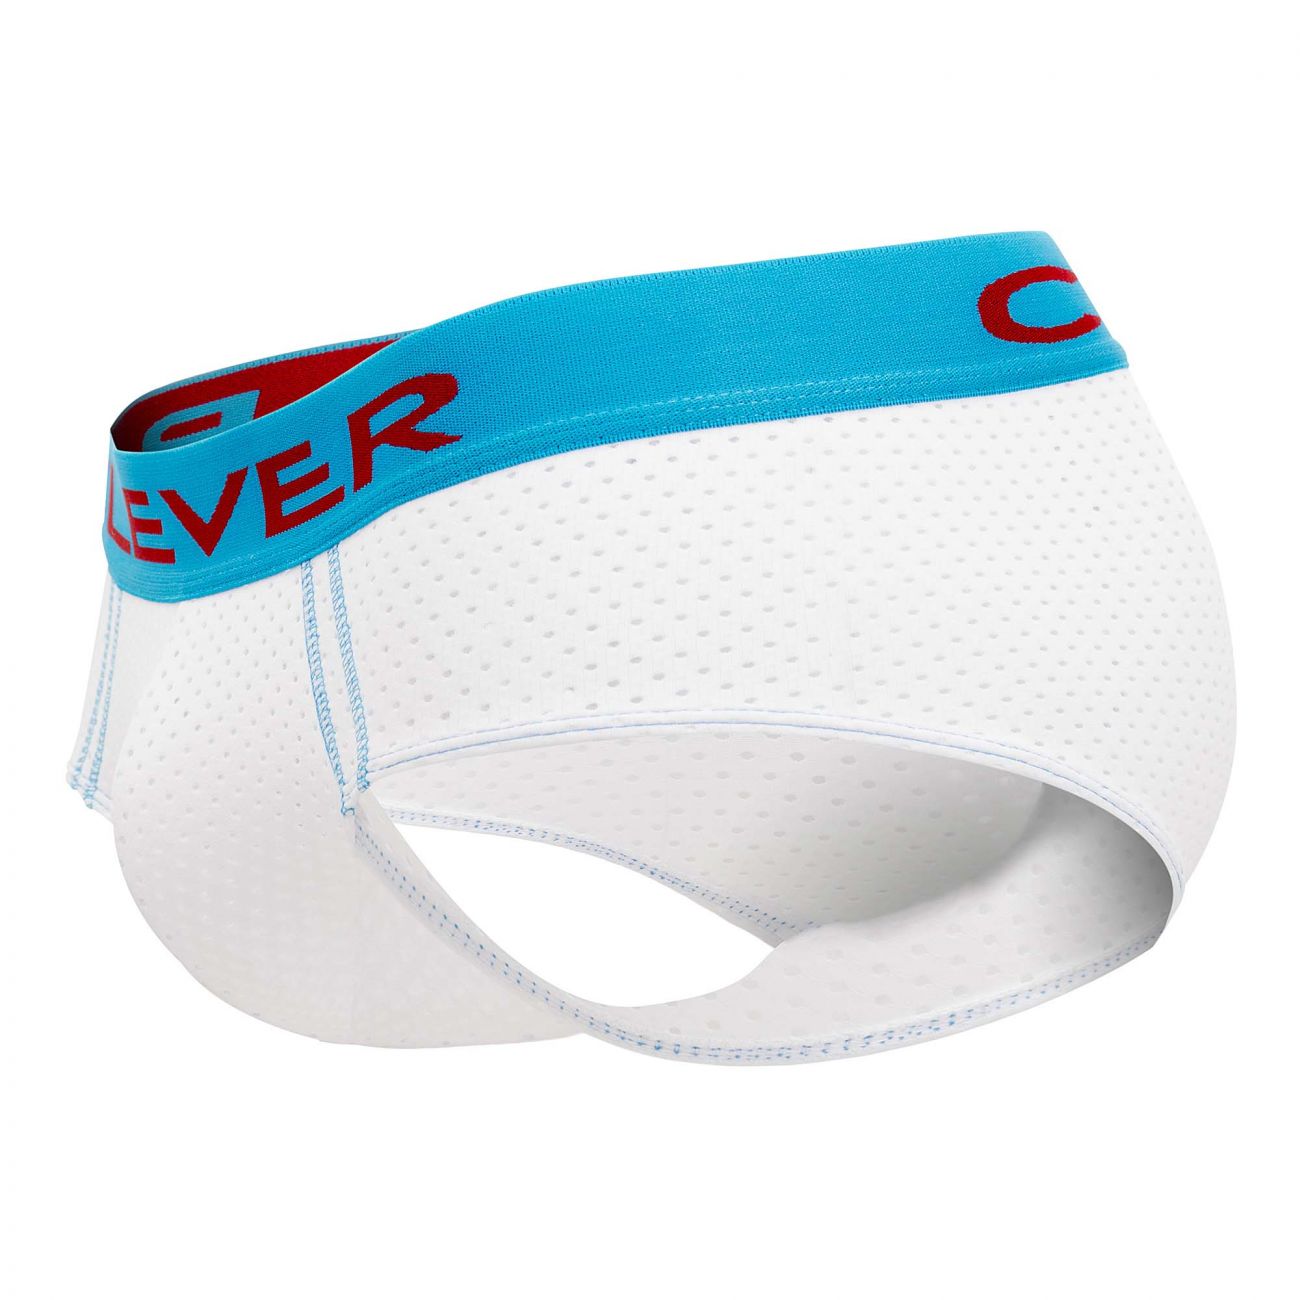 Clever 0421 Requirement Briefs White